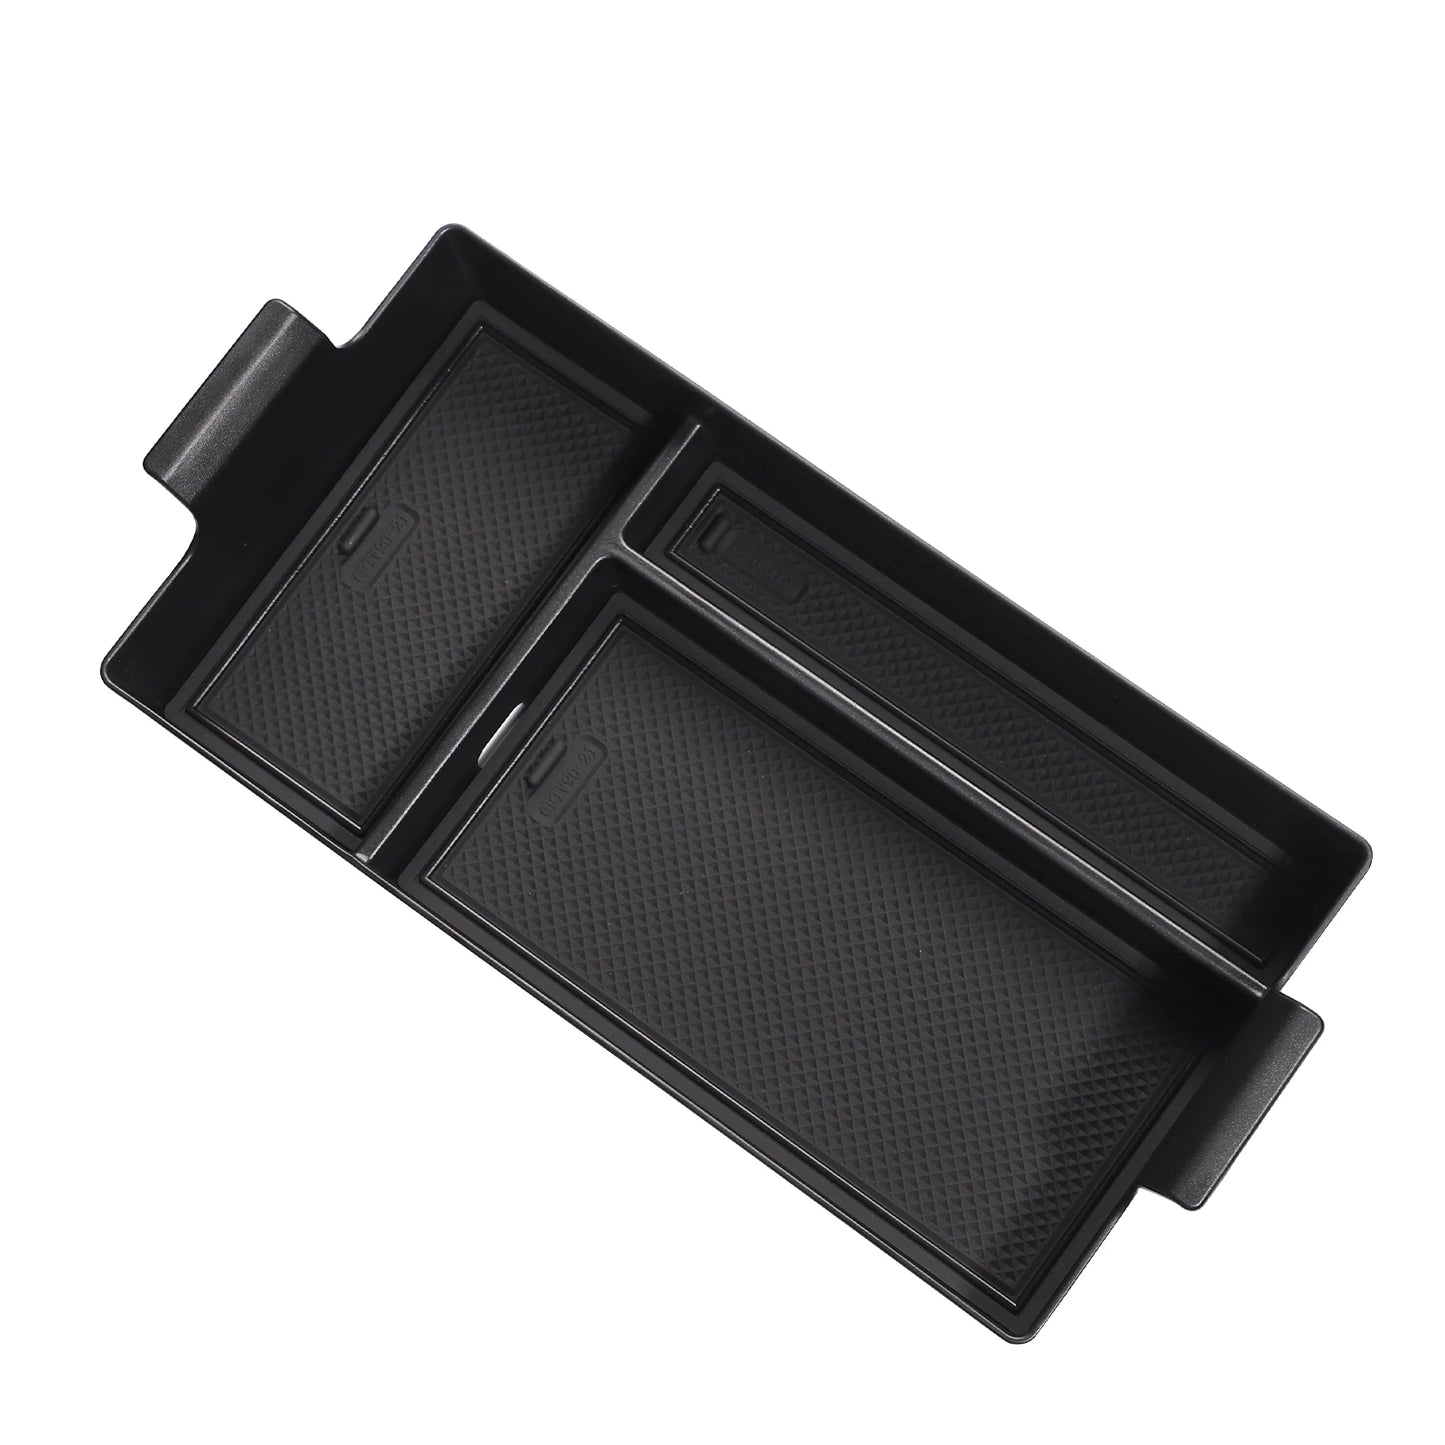 Central Armrest Storage Box for Toyota NOAH Voxy 90 Series Car Center Console Tray Organizer Tidying Accessories  VehiDecors VOXY90 BOX BLACK  